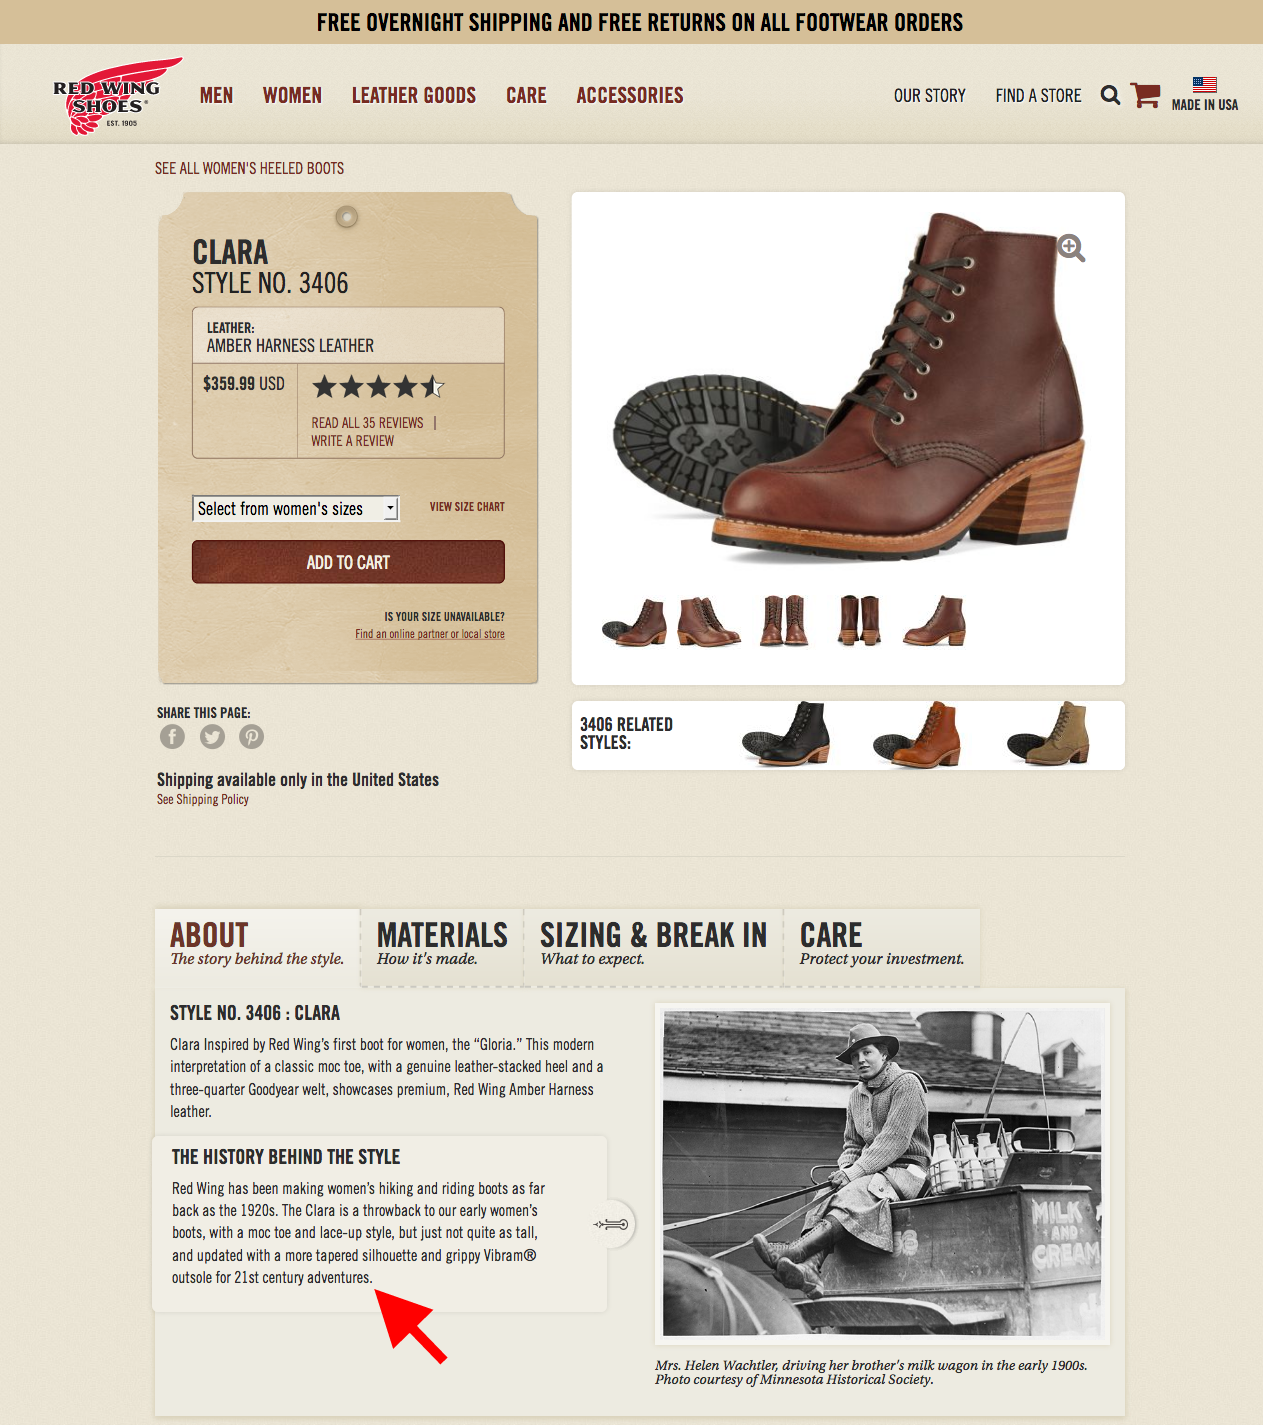 Red Wing Shoes Finds the Right Fit With Customer Analytics